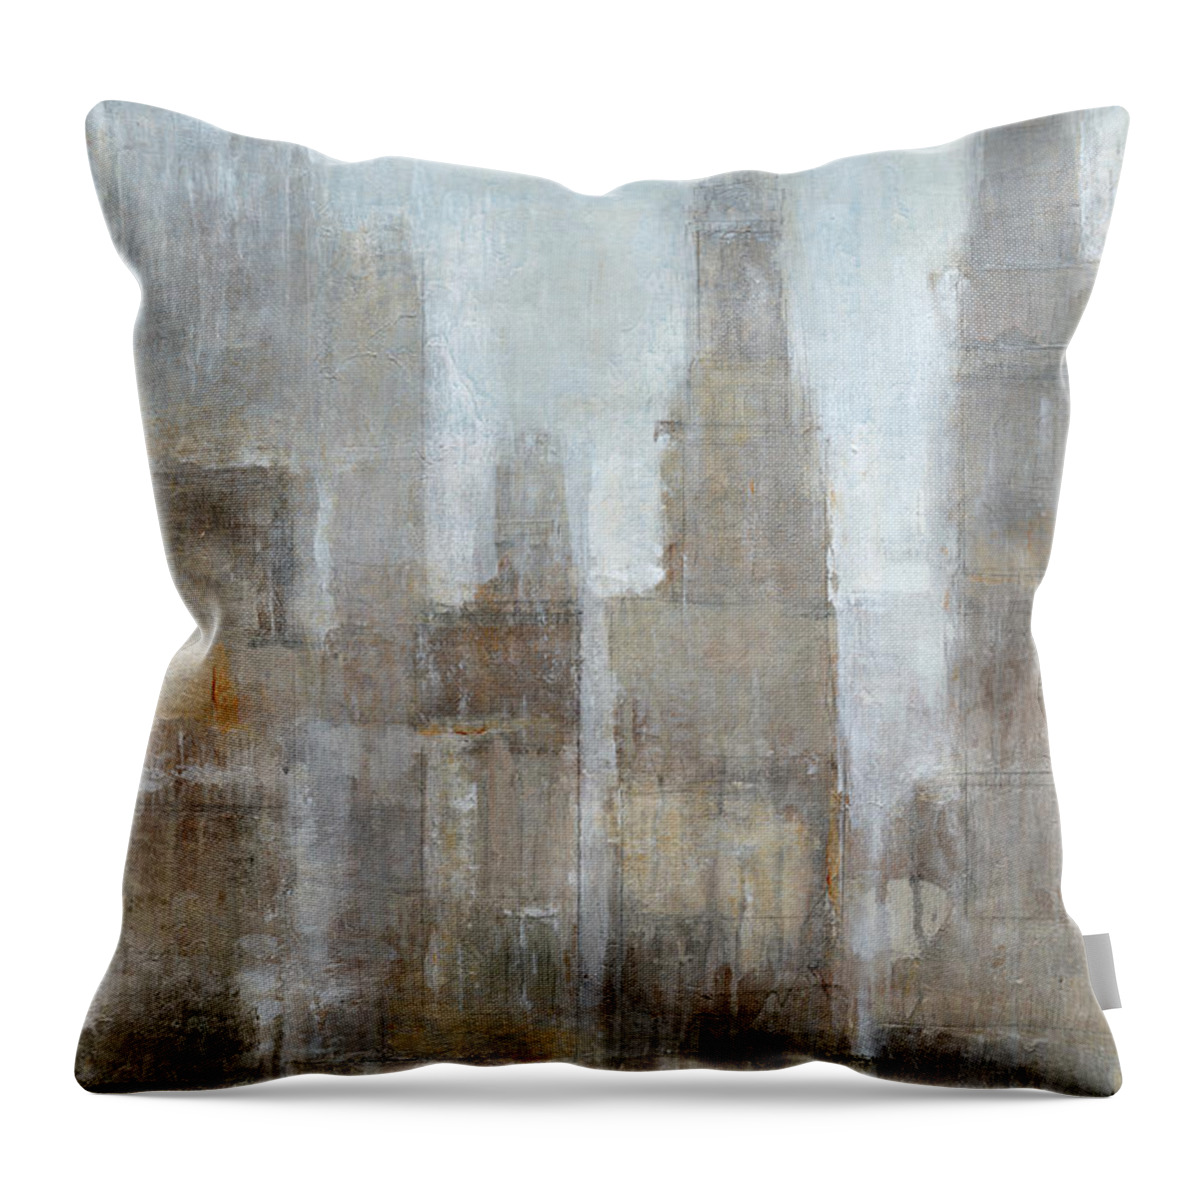 Landscapes Throw Pillow featuring the painting City Midst II by Tim Otoole